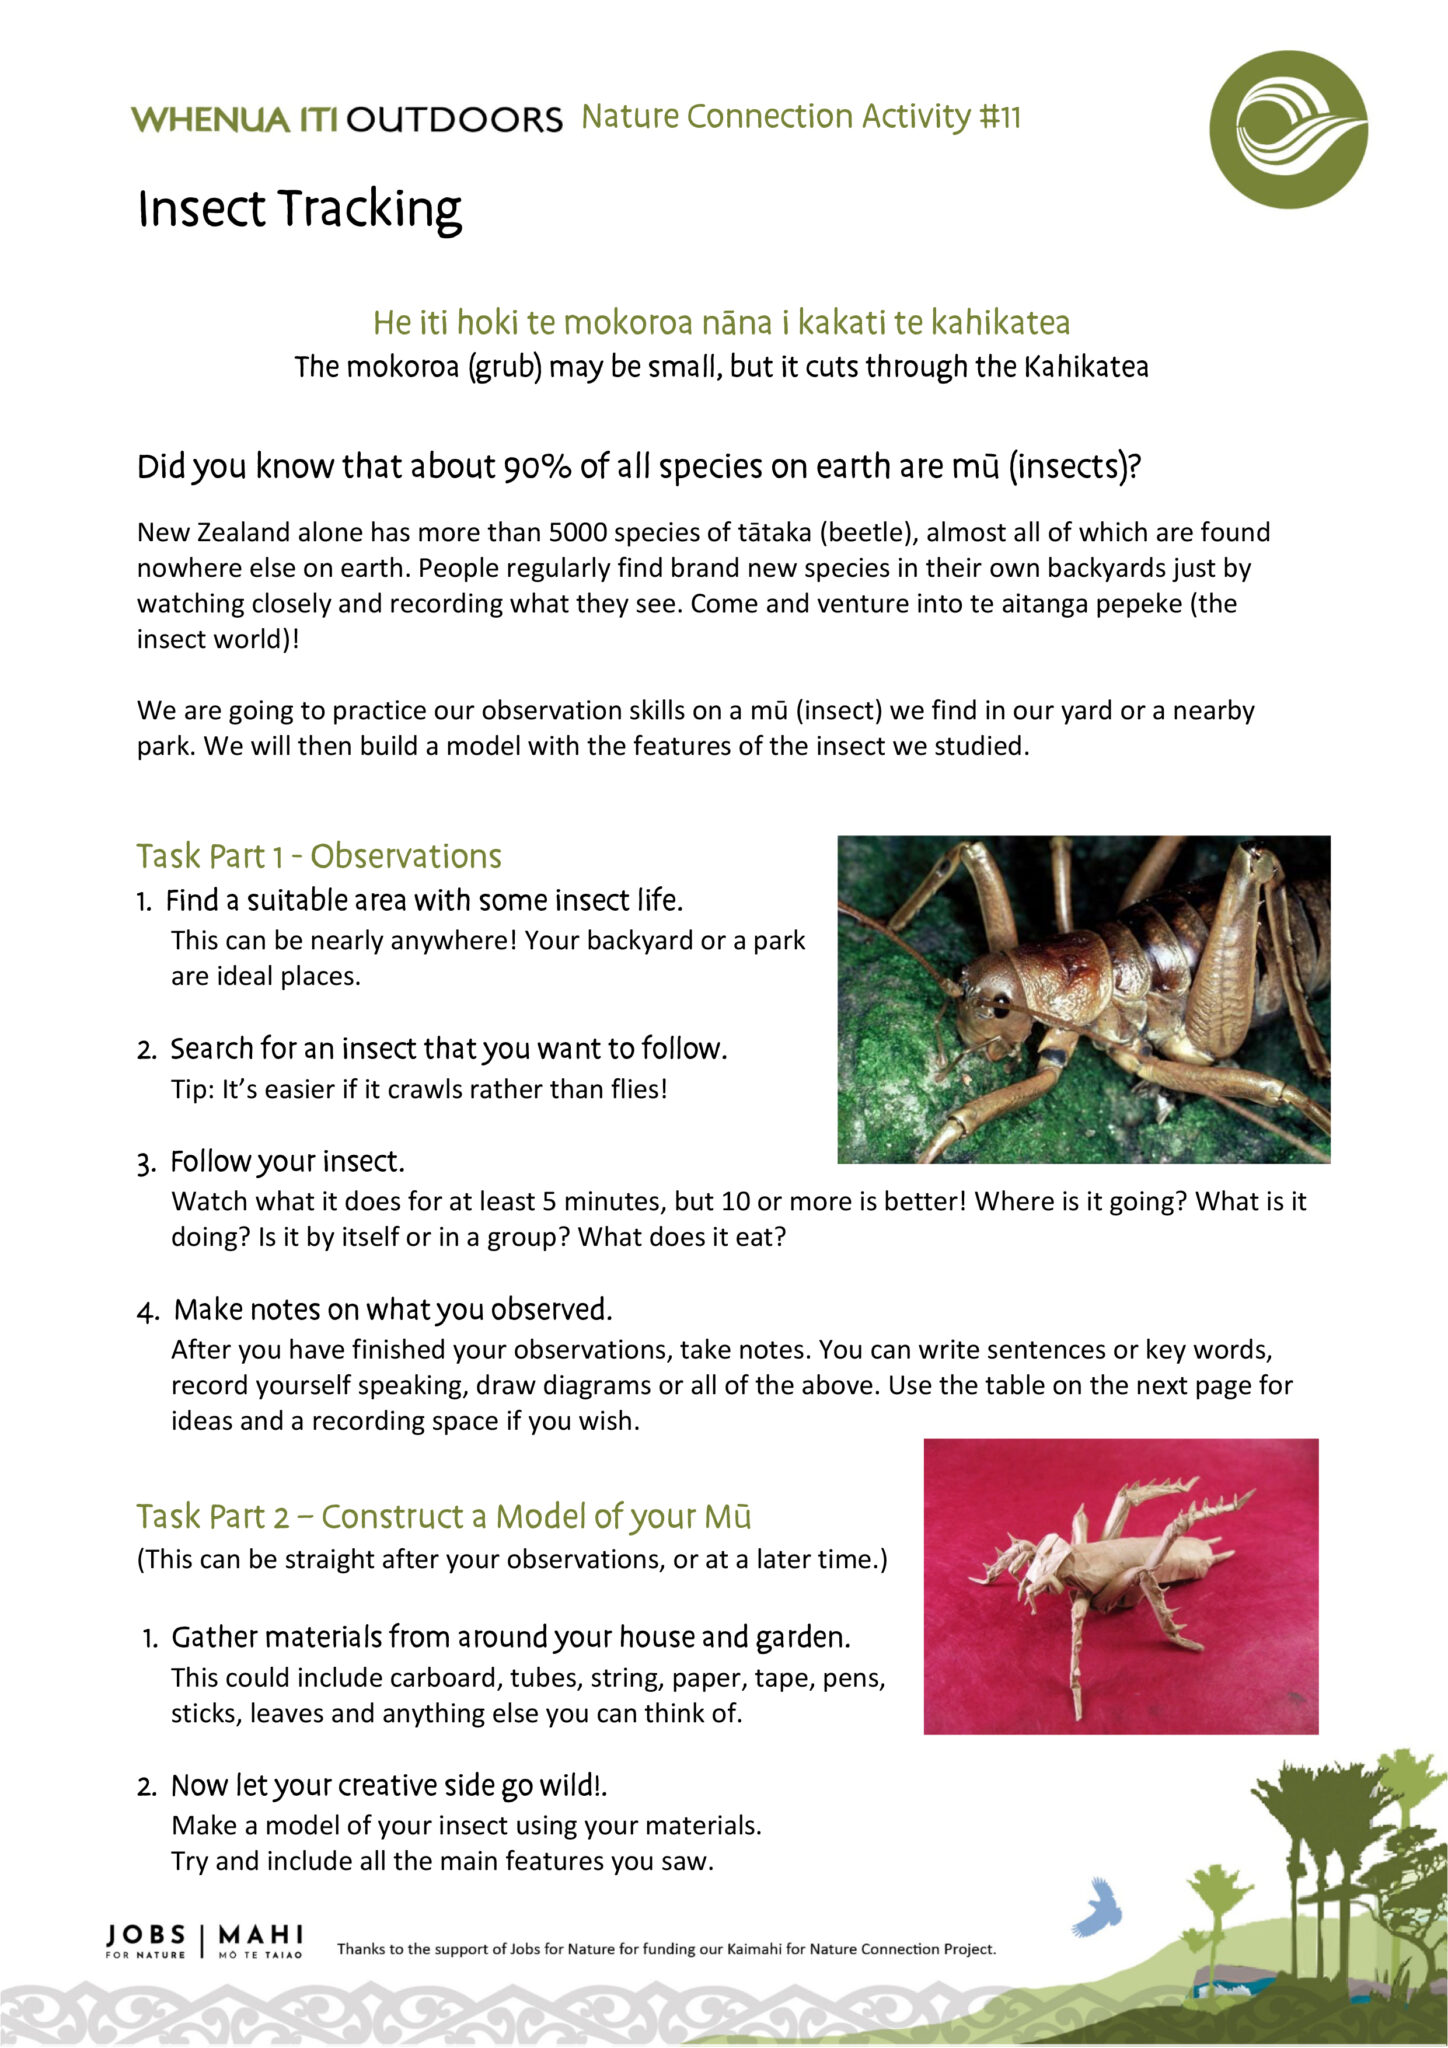 WIO Activity #11 Insect Tracking